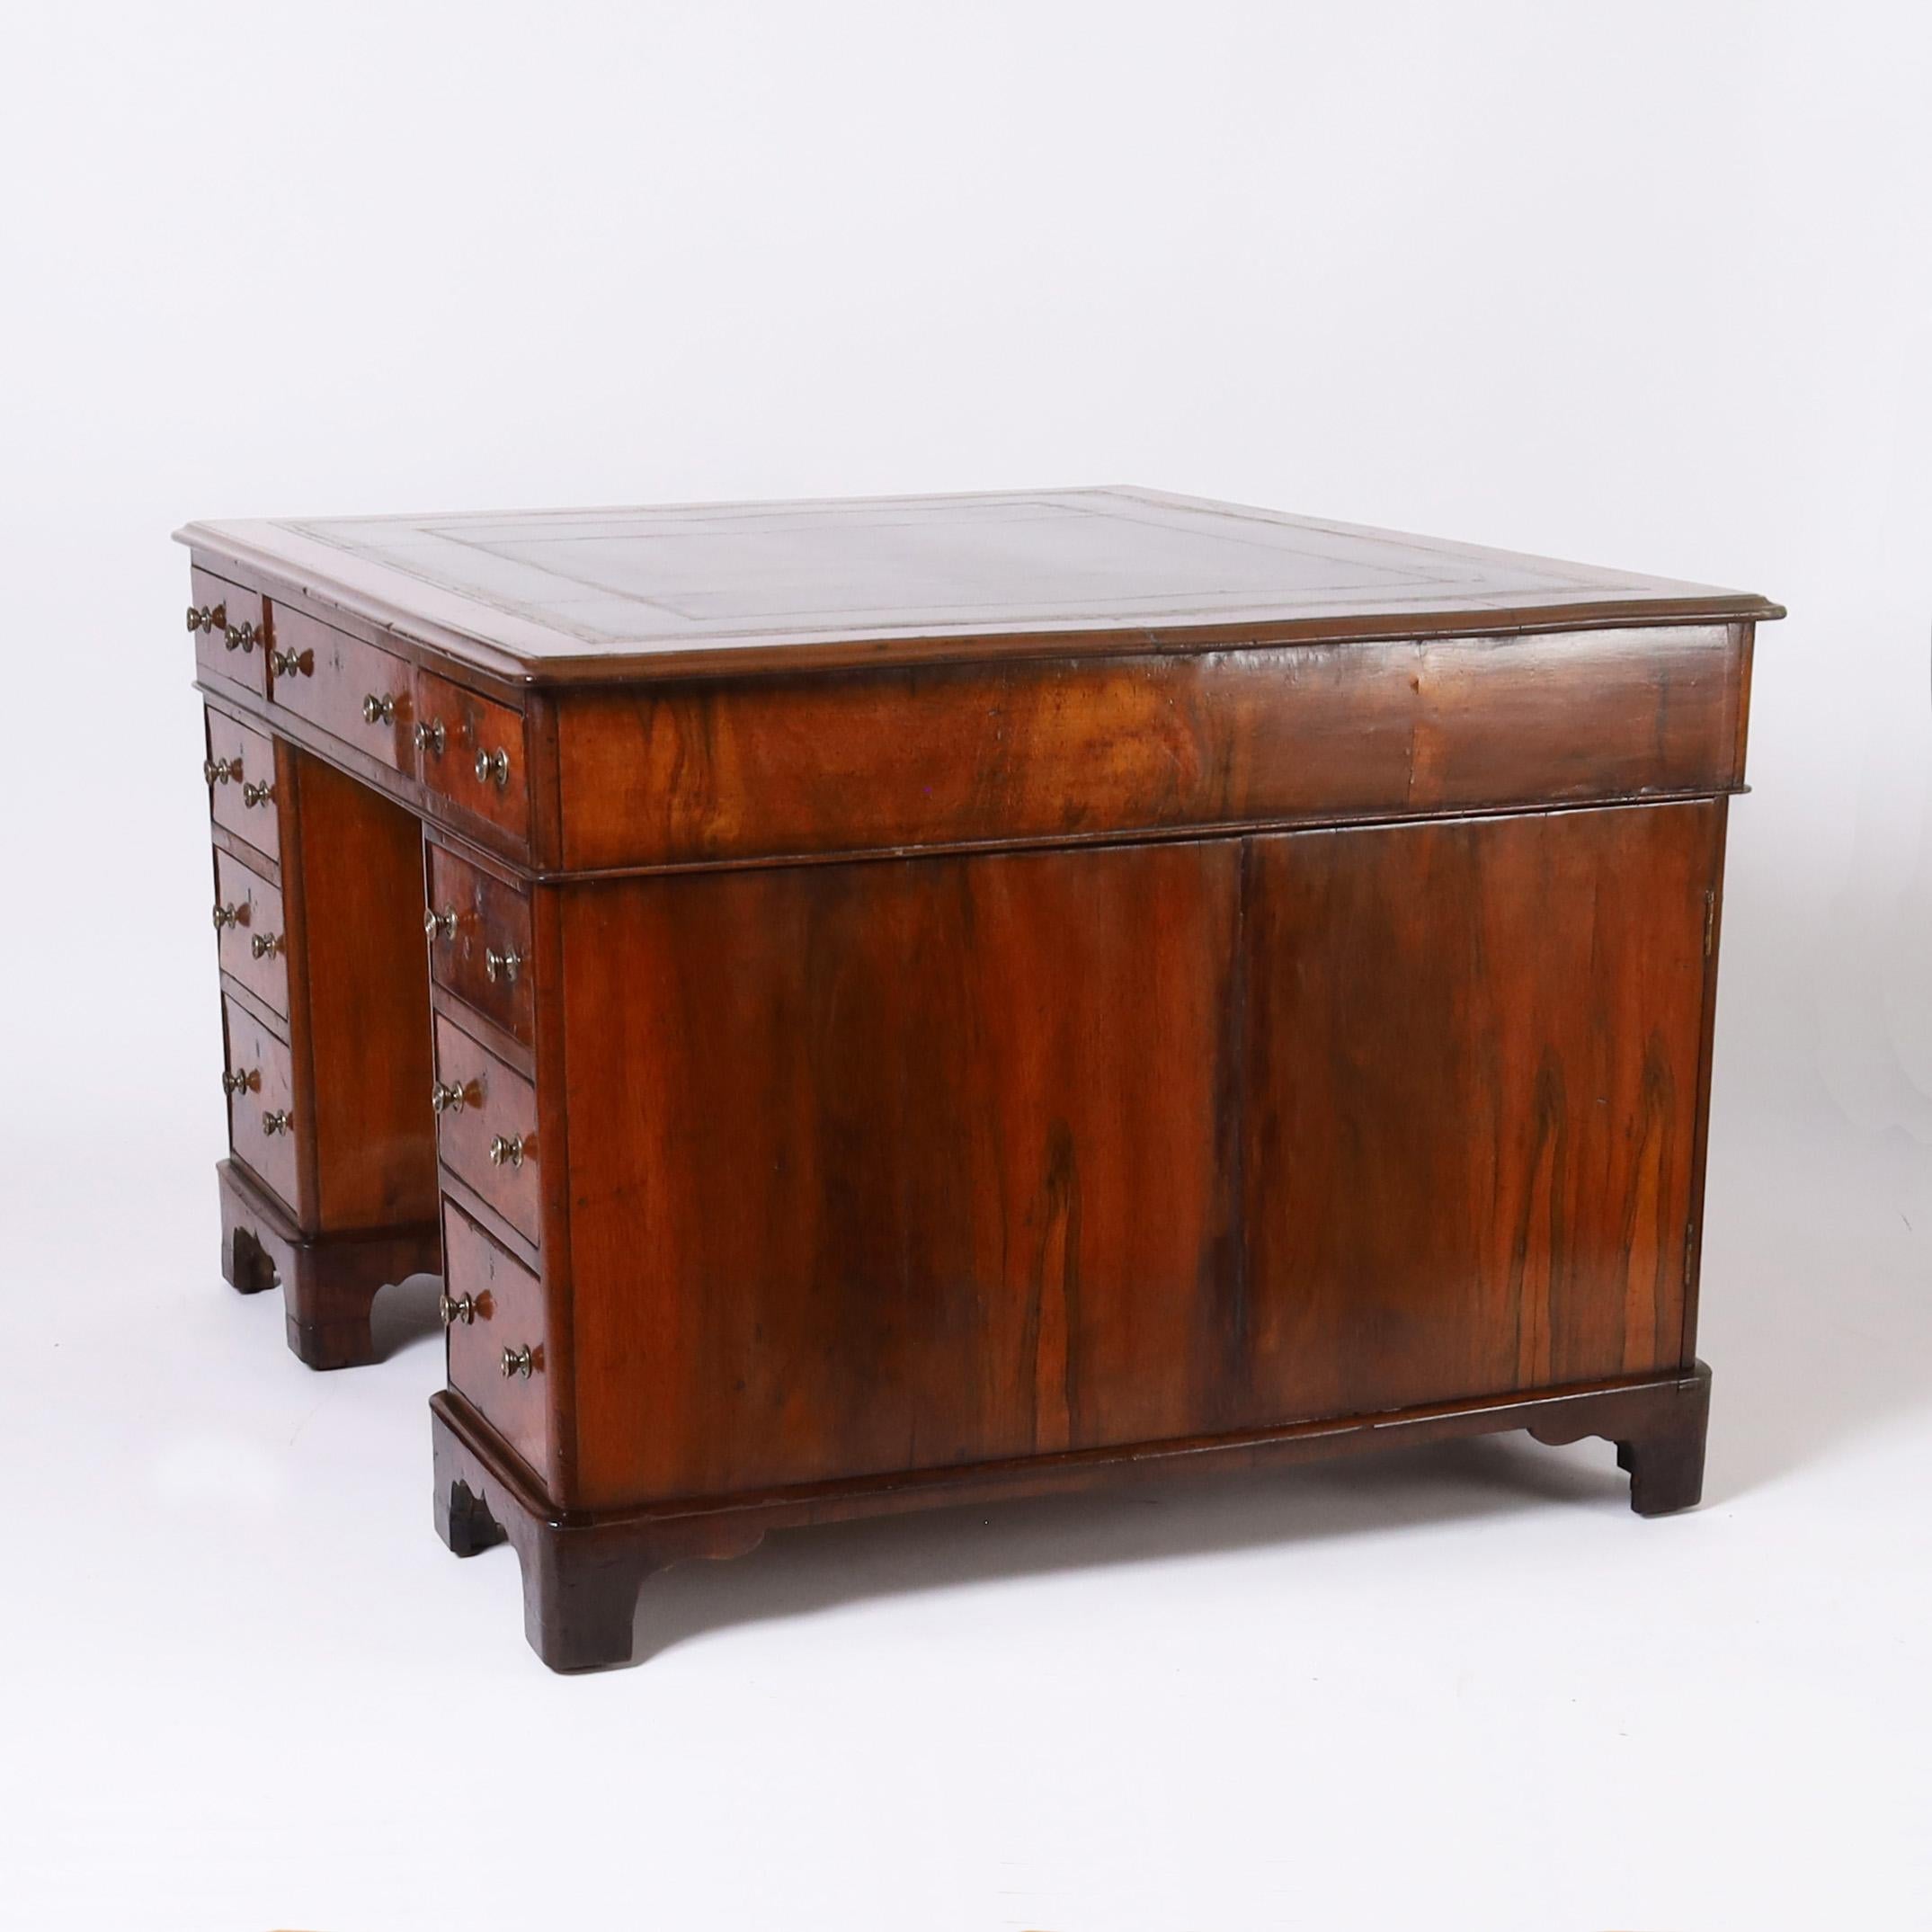 Victorian Antique English Leather Top Partners Desk For Sale